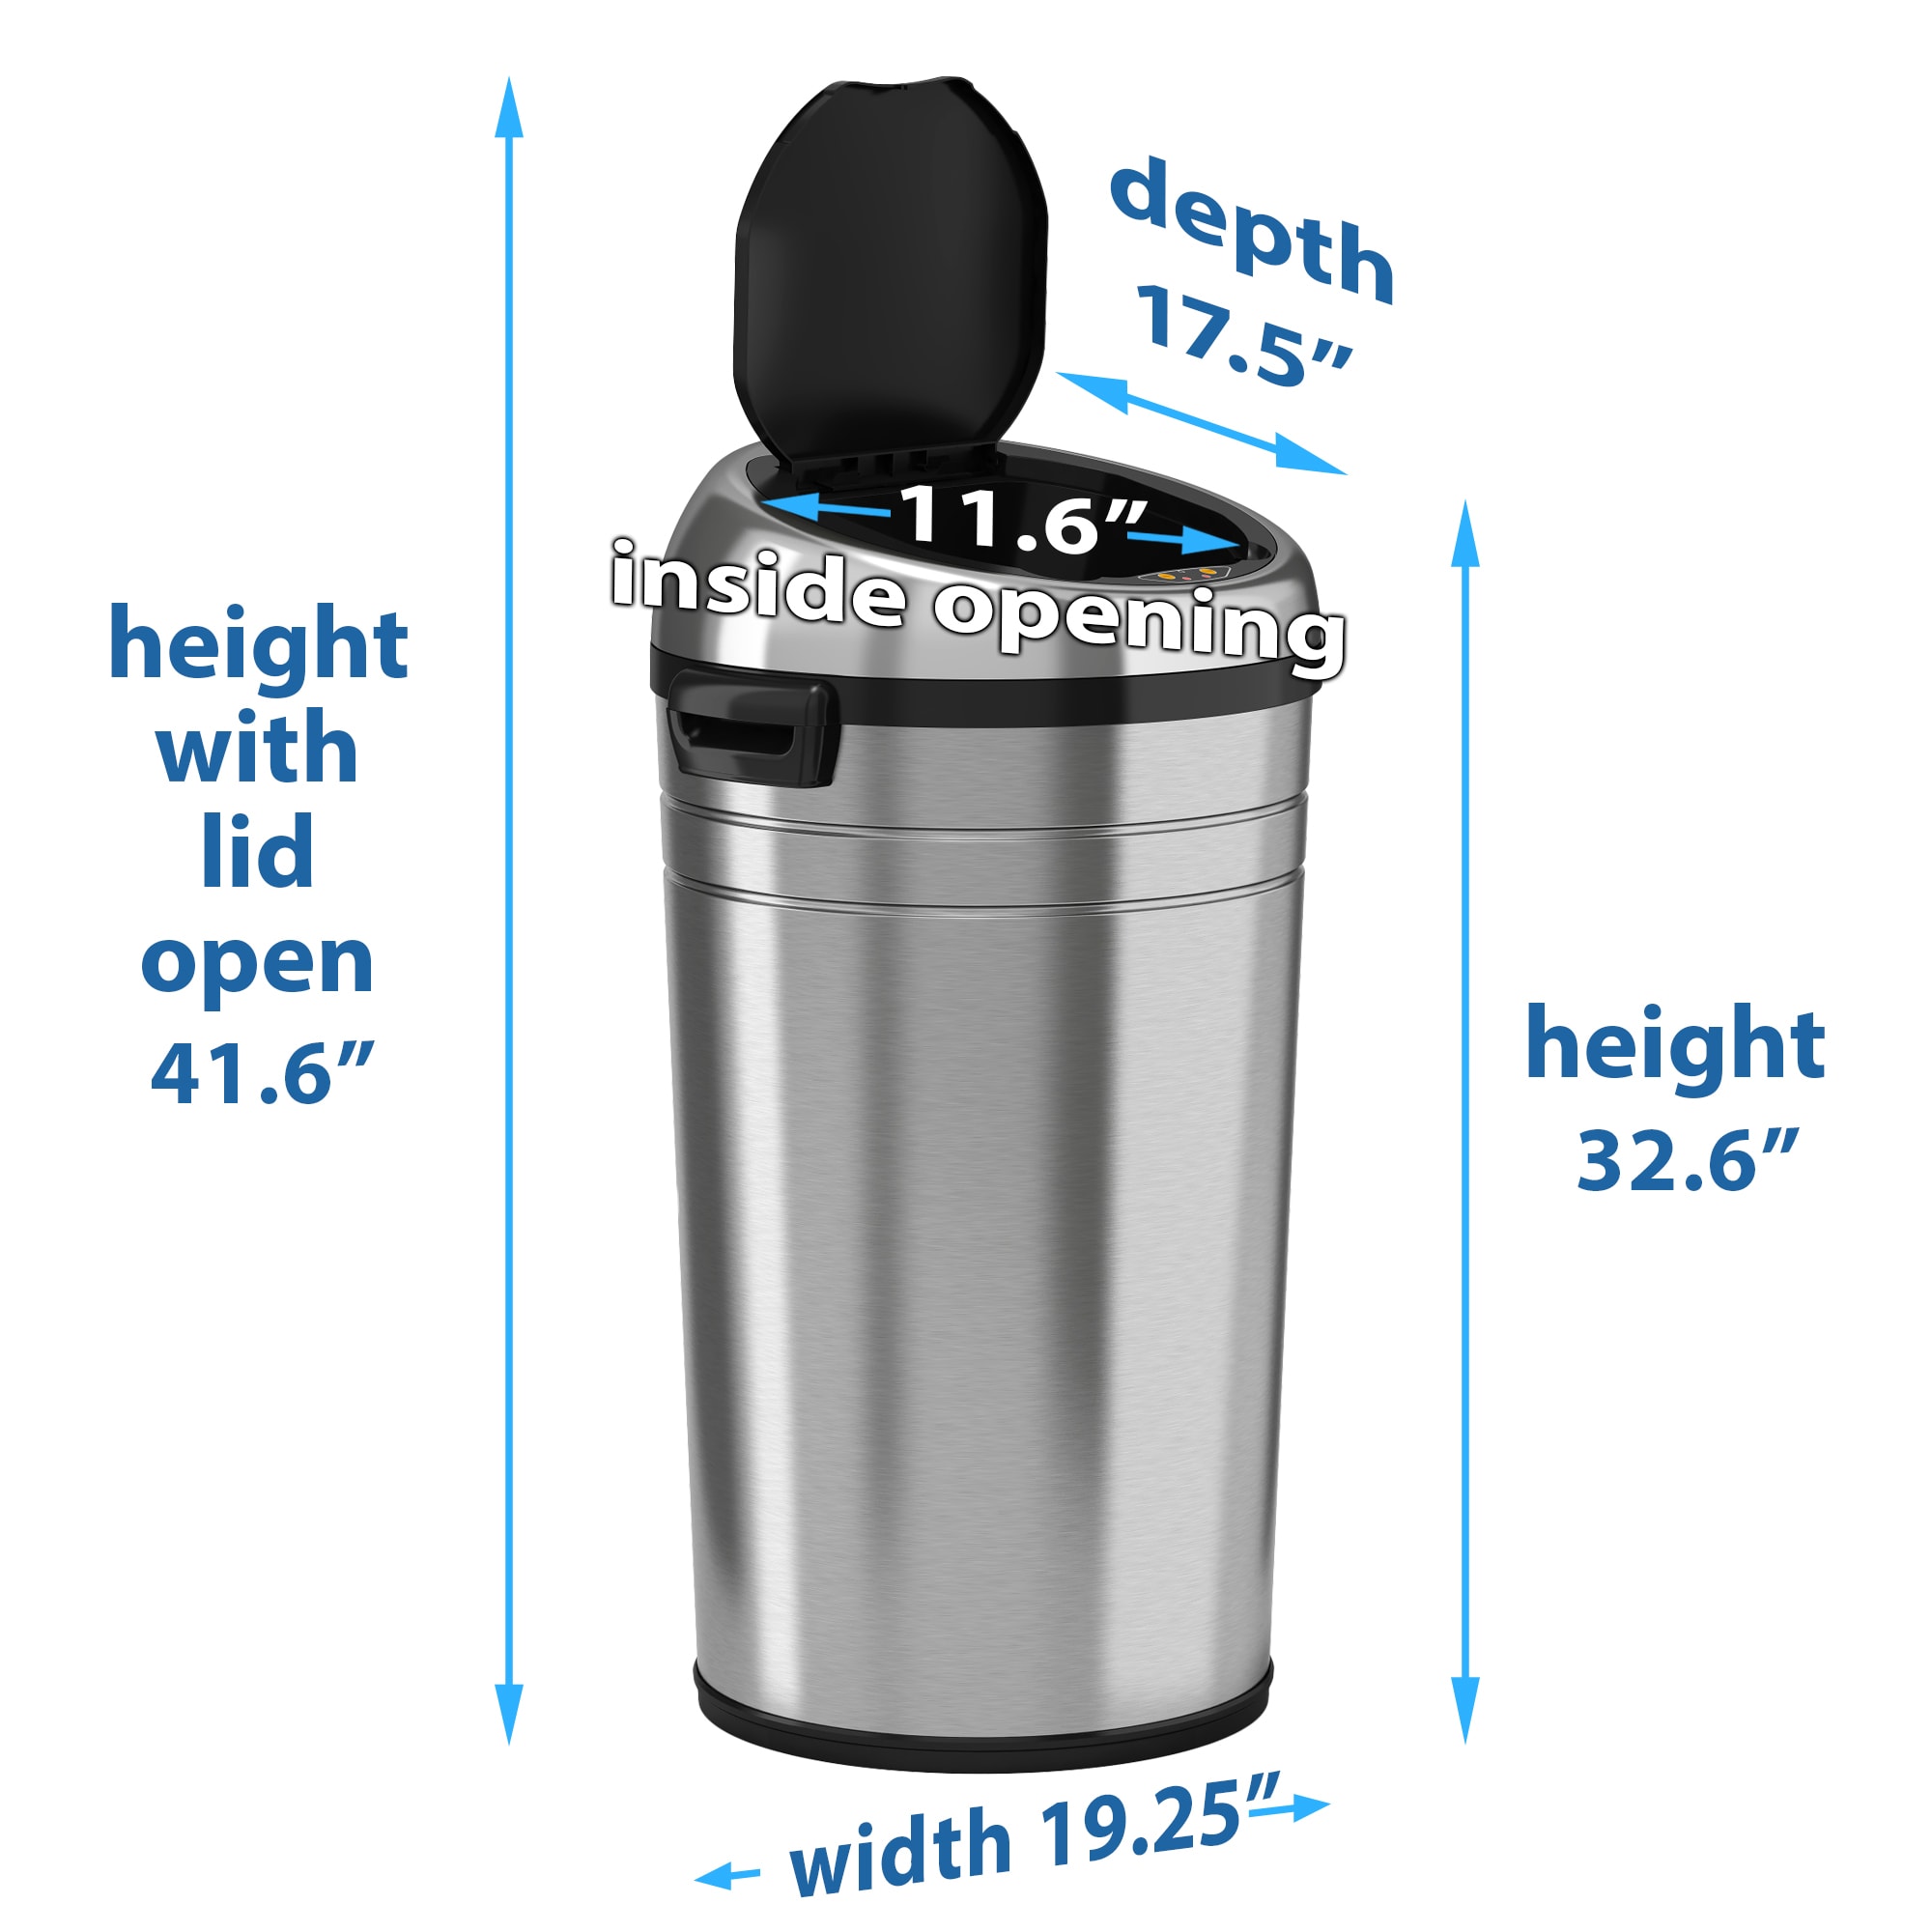 Itouchless Itouchless IT23RC 23-Gallon Stainless-Steel Touchless Trash Can  IT23RC